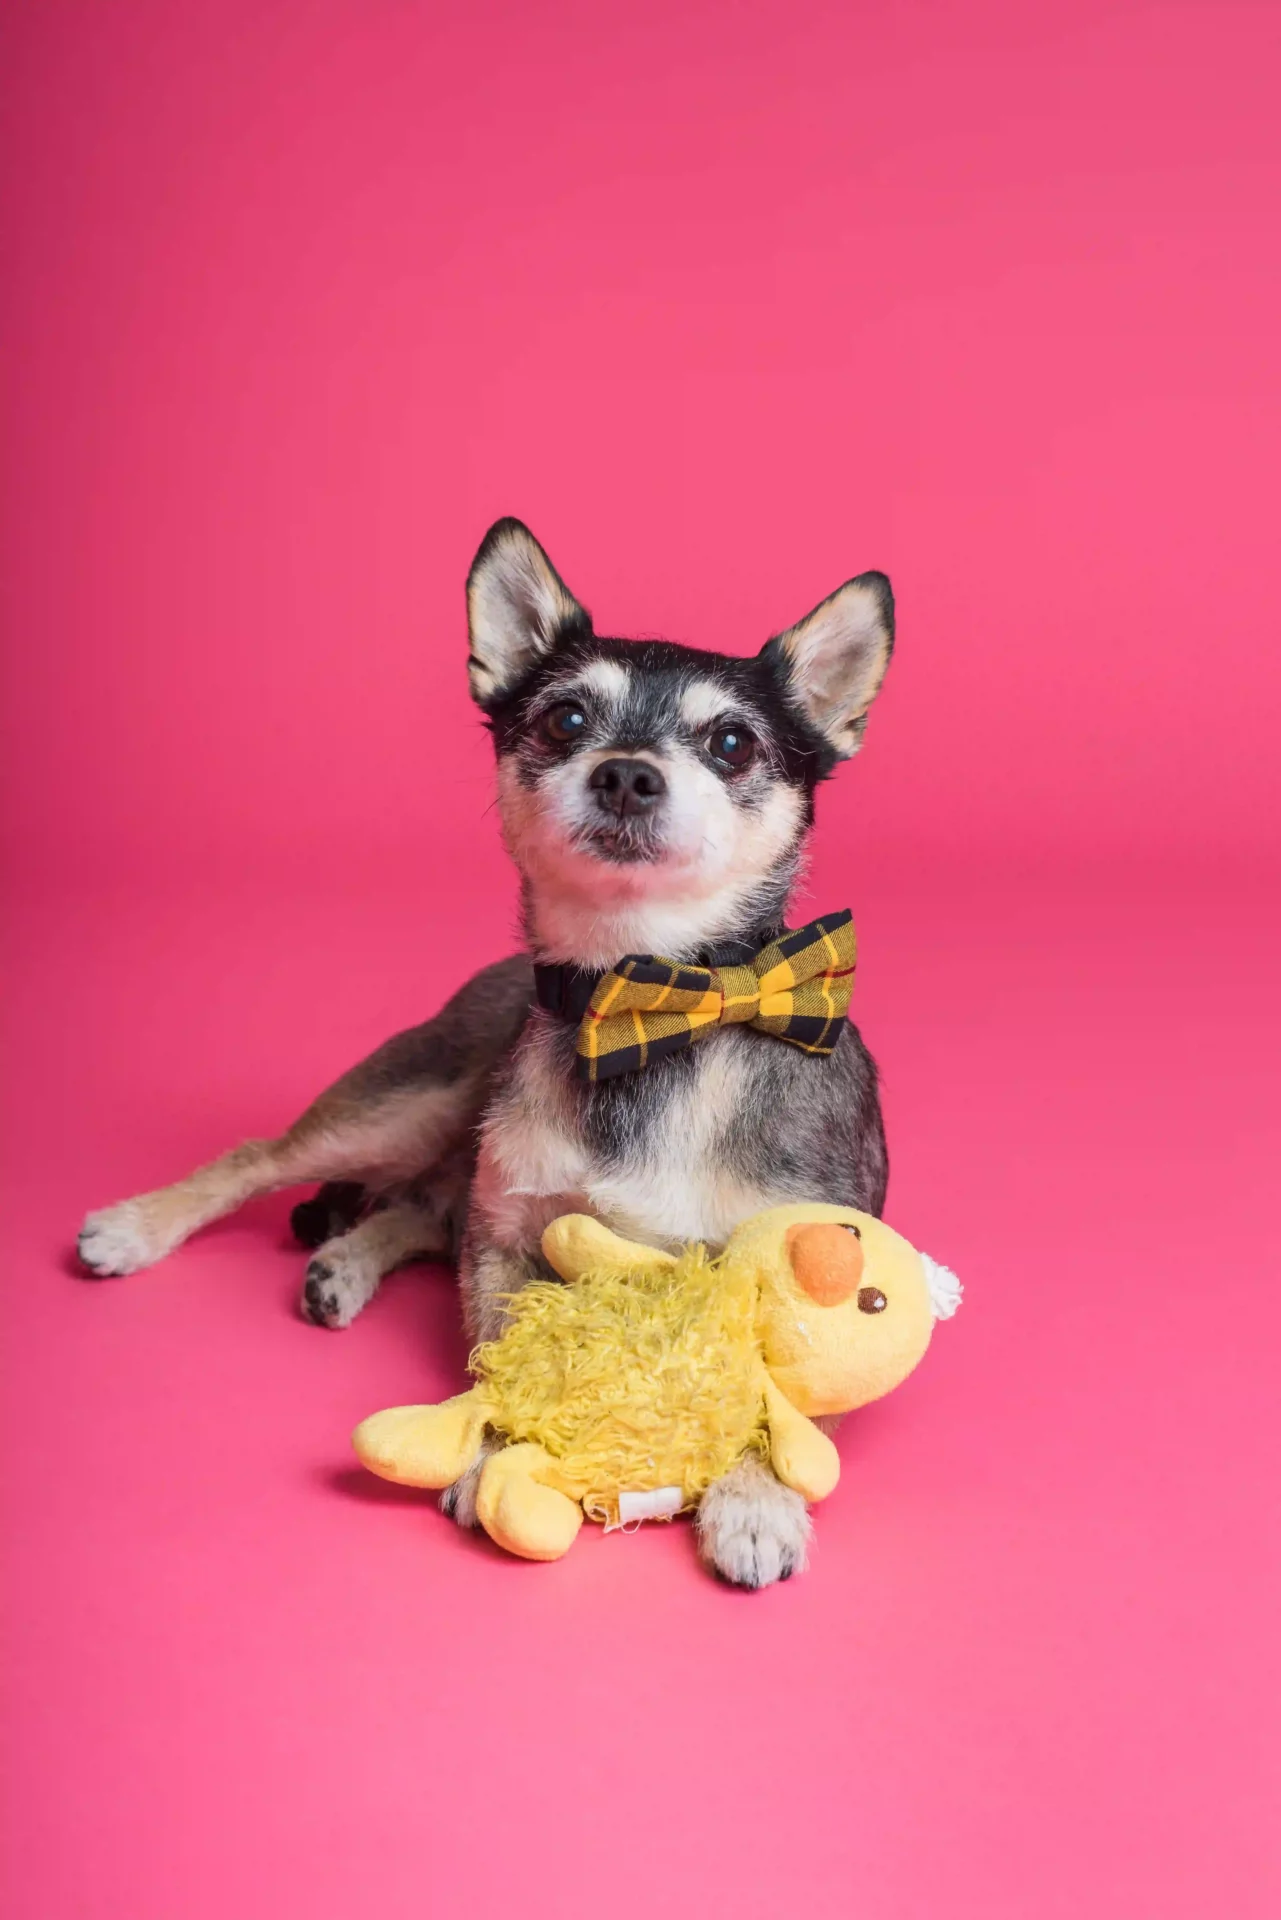 A chihuahua with a stuffed toy wearing a bow on a pink background.